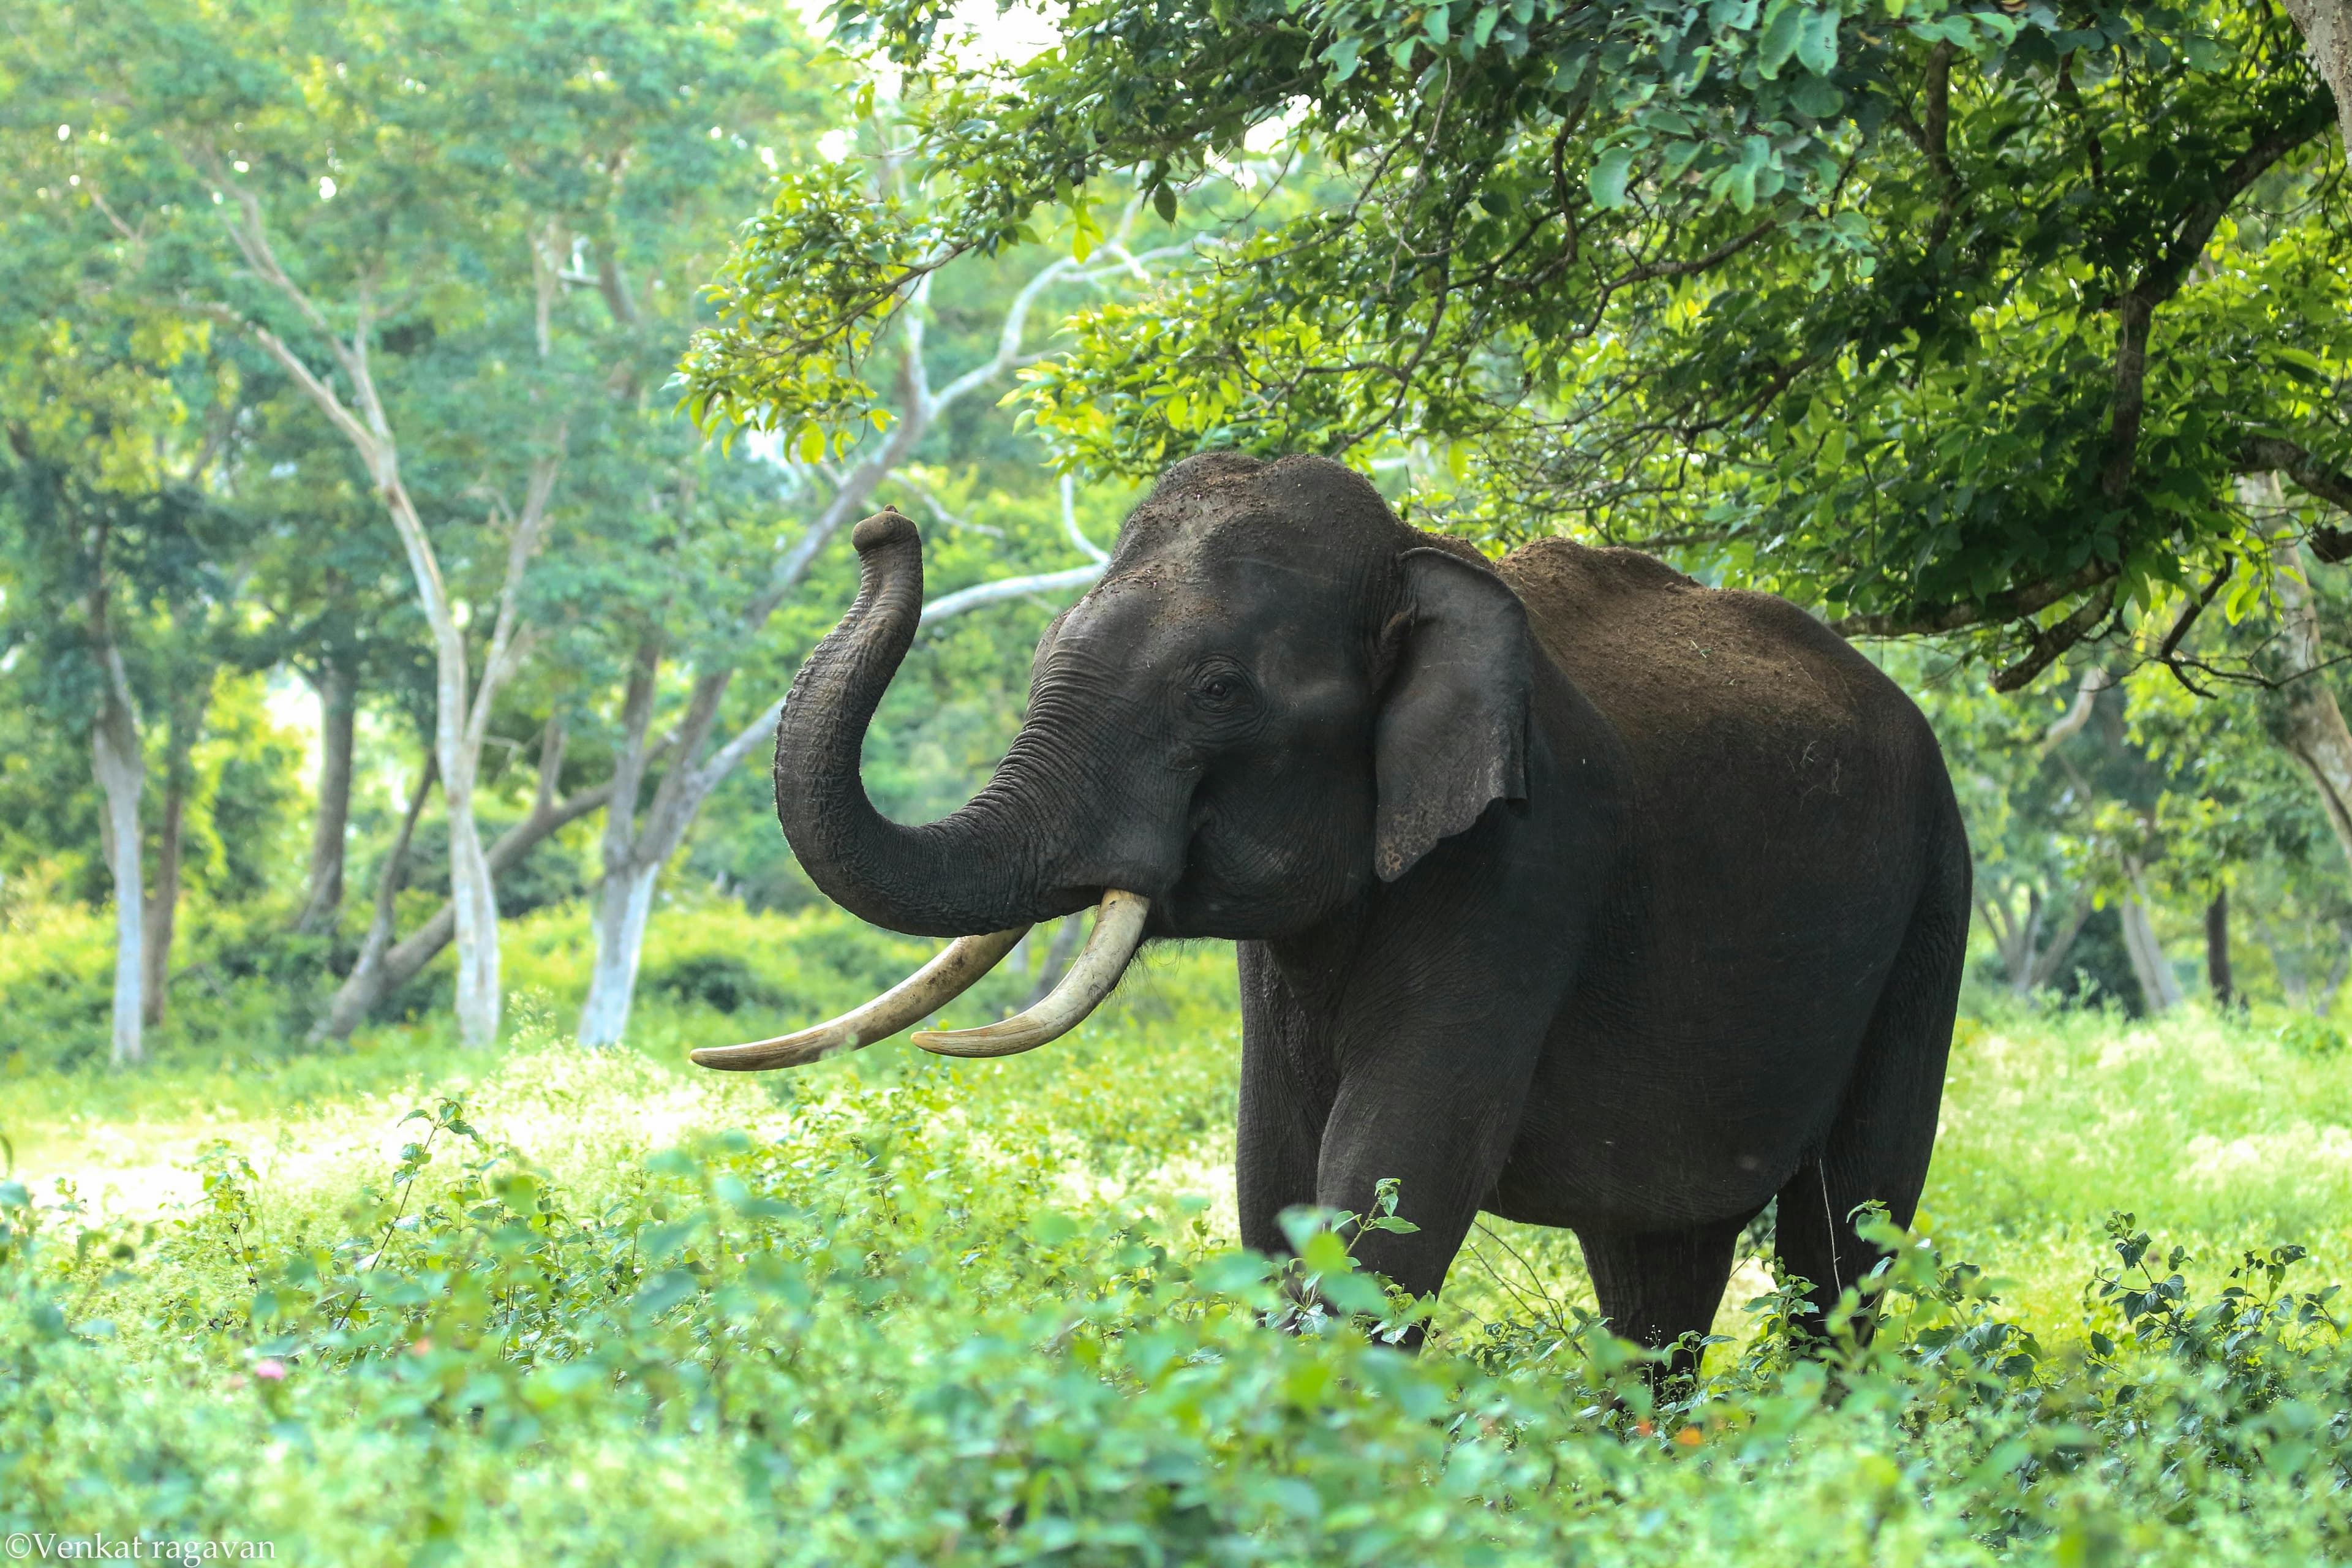 An elephant stands in a green forest, its trunk is raised and its tusks are visible.